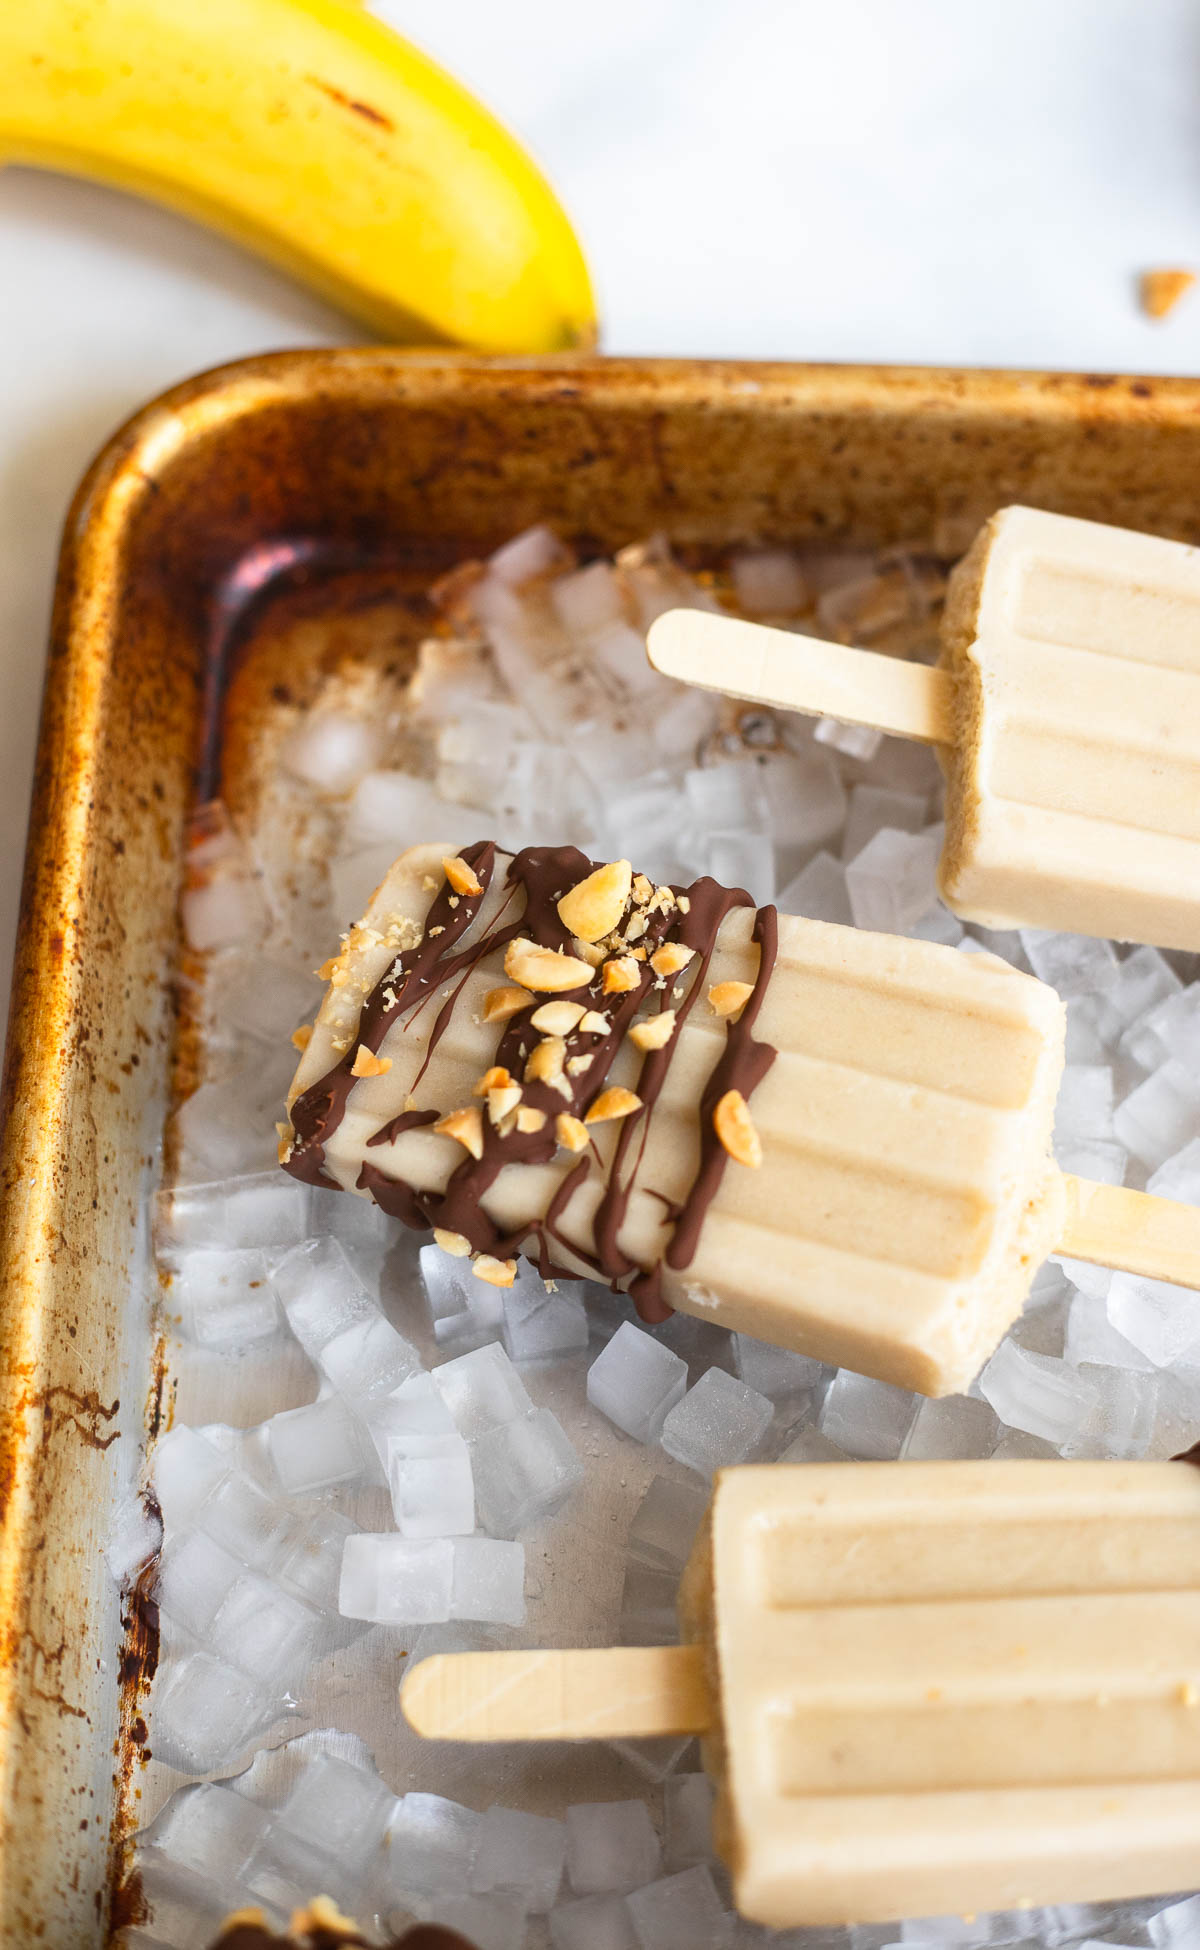 close up photo of banana popsicle with chocolate and chopped peanuts.